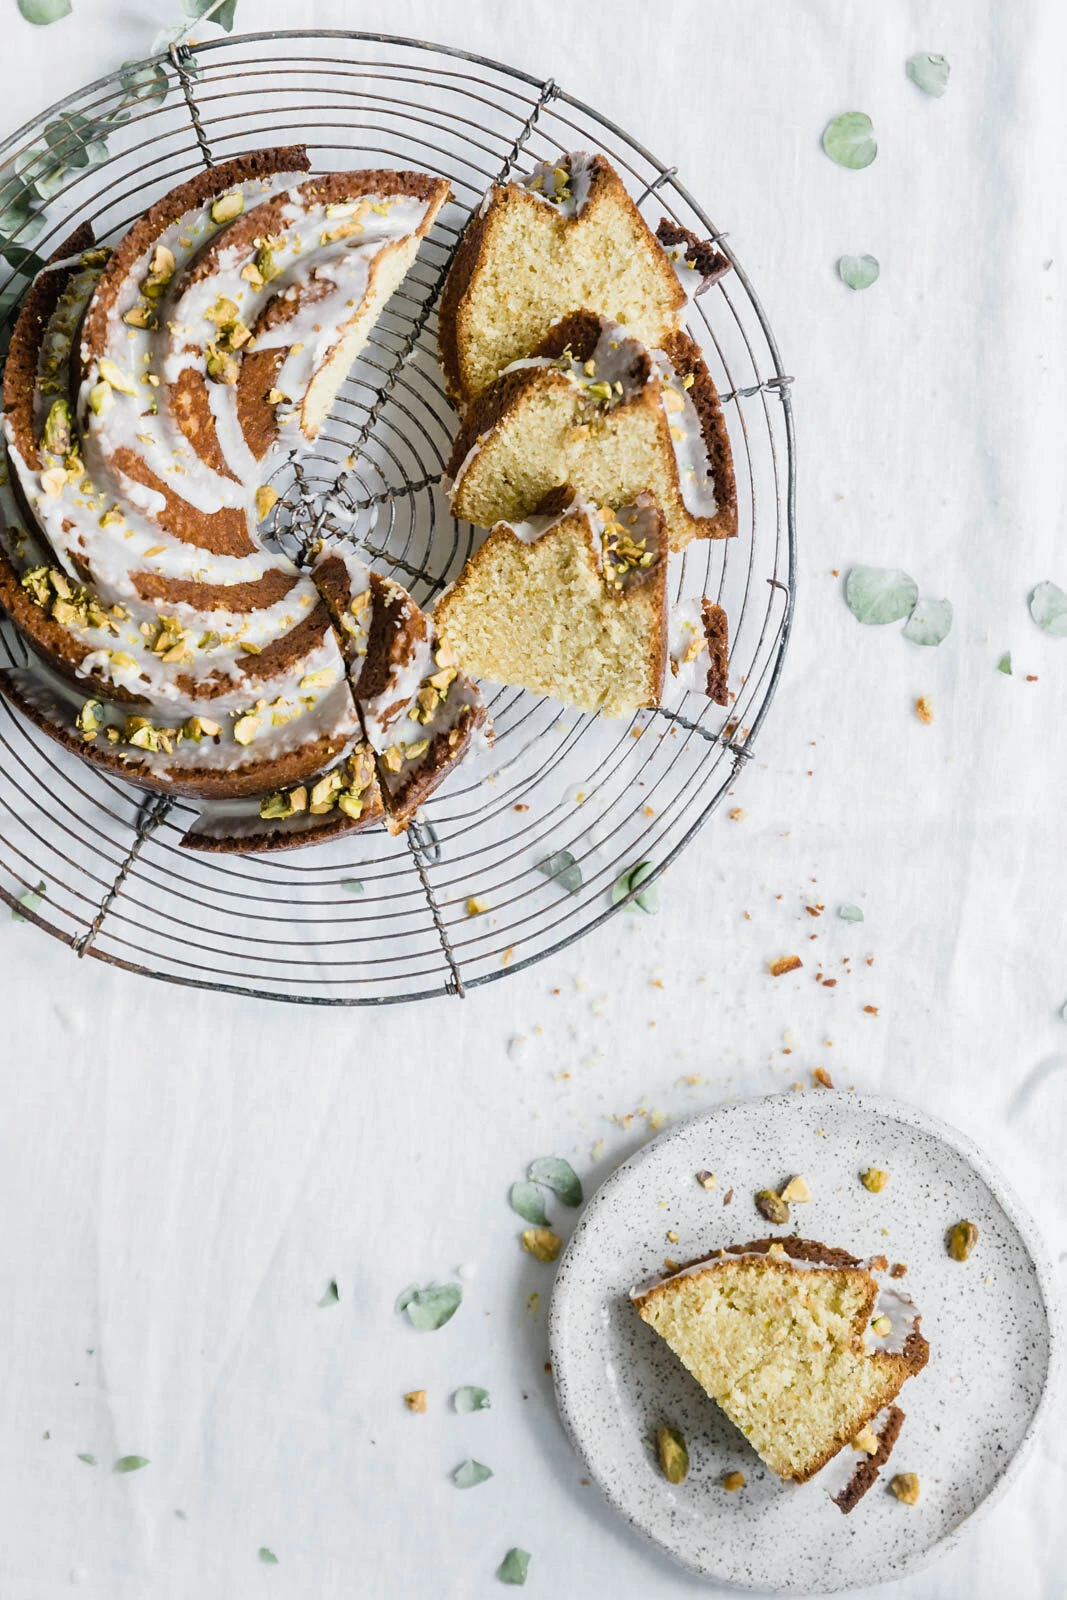 A super moist olive oil cake with pistachios and lemon makes for a luxurious weekend treat. The olive oil imparts the most delicious flavor!